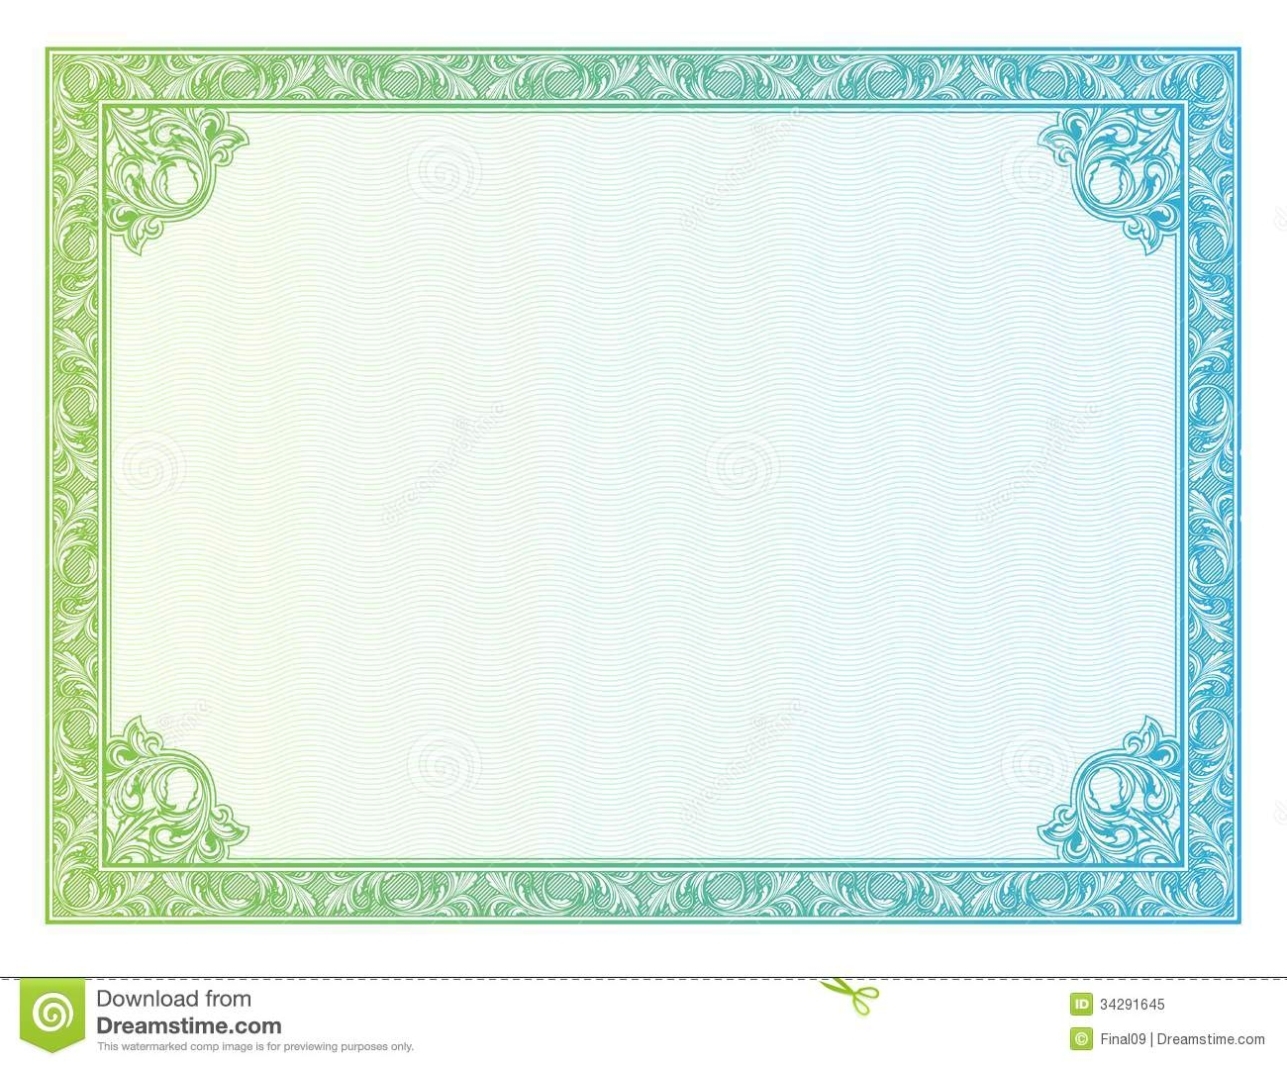 Certificate Border Vector Free At Getdrawings | Free Download Intended For Free Printable Certificate Border Templates